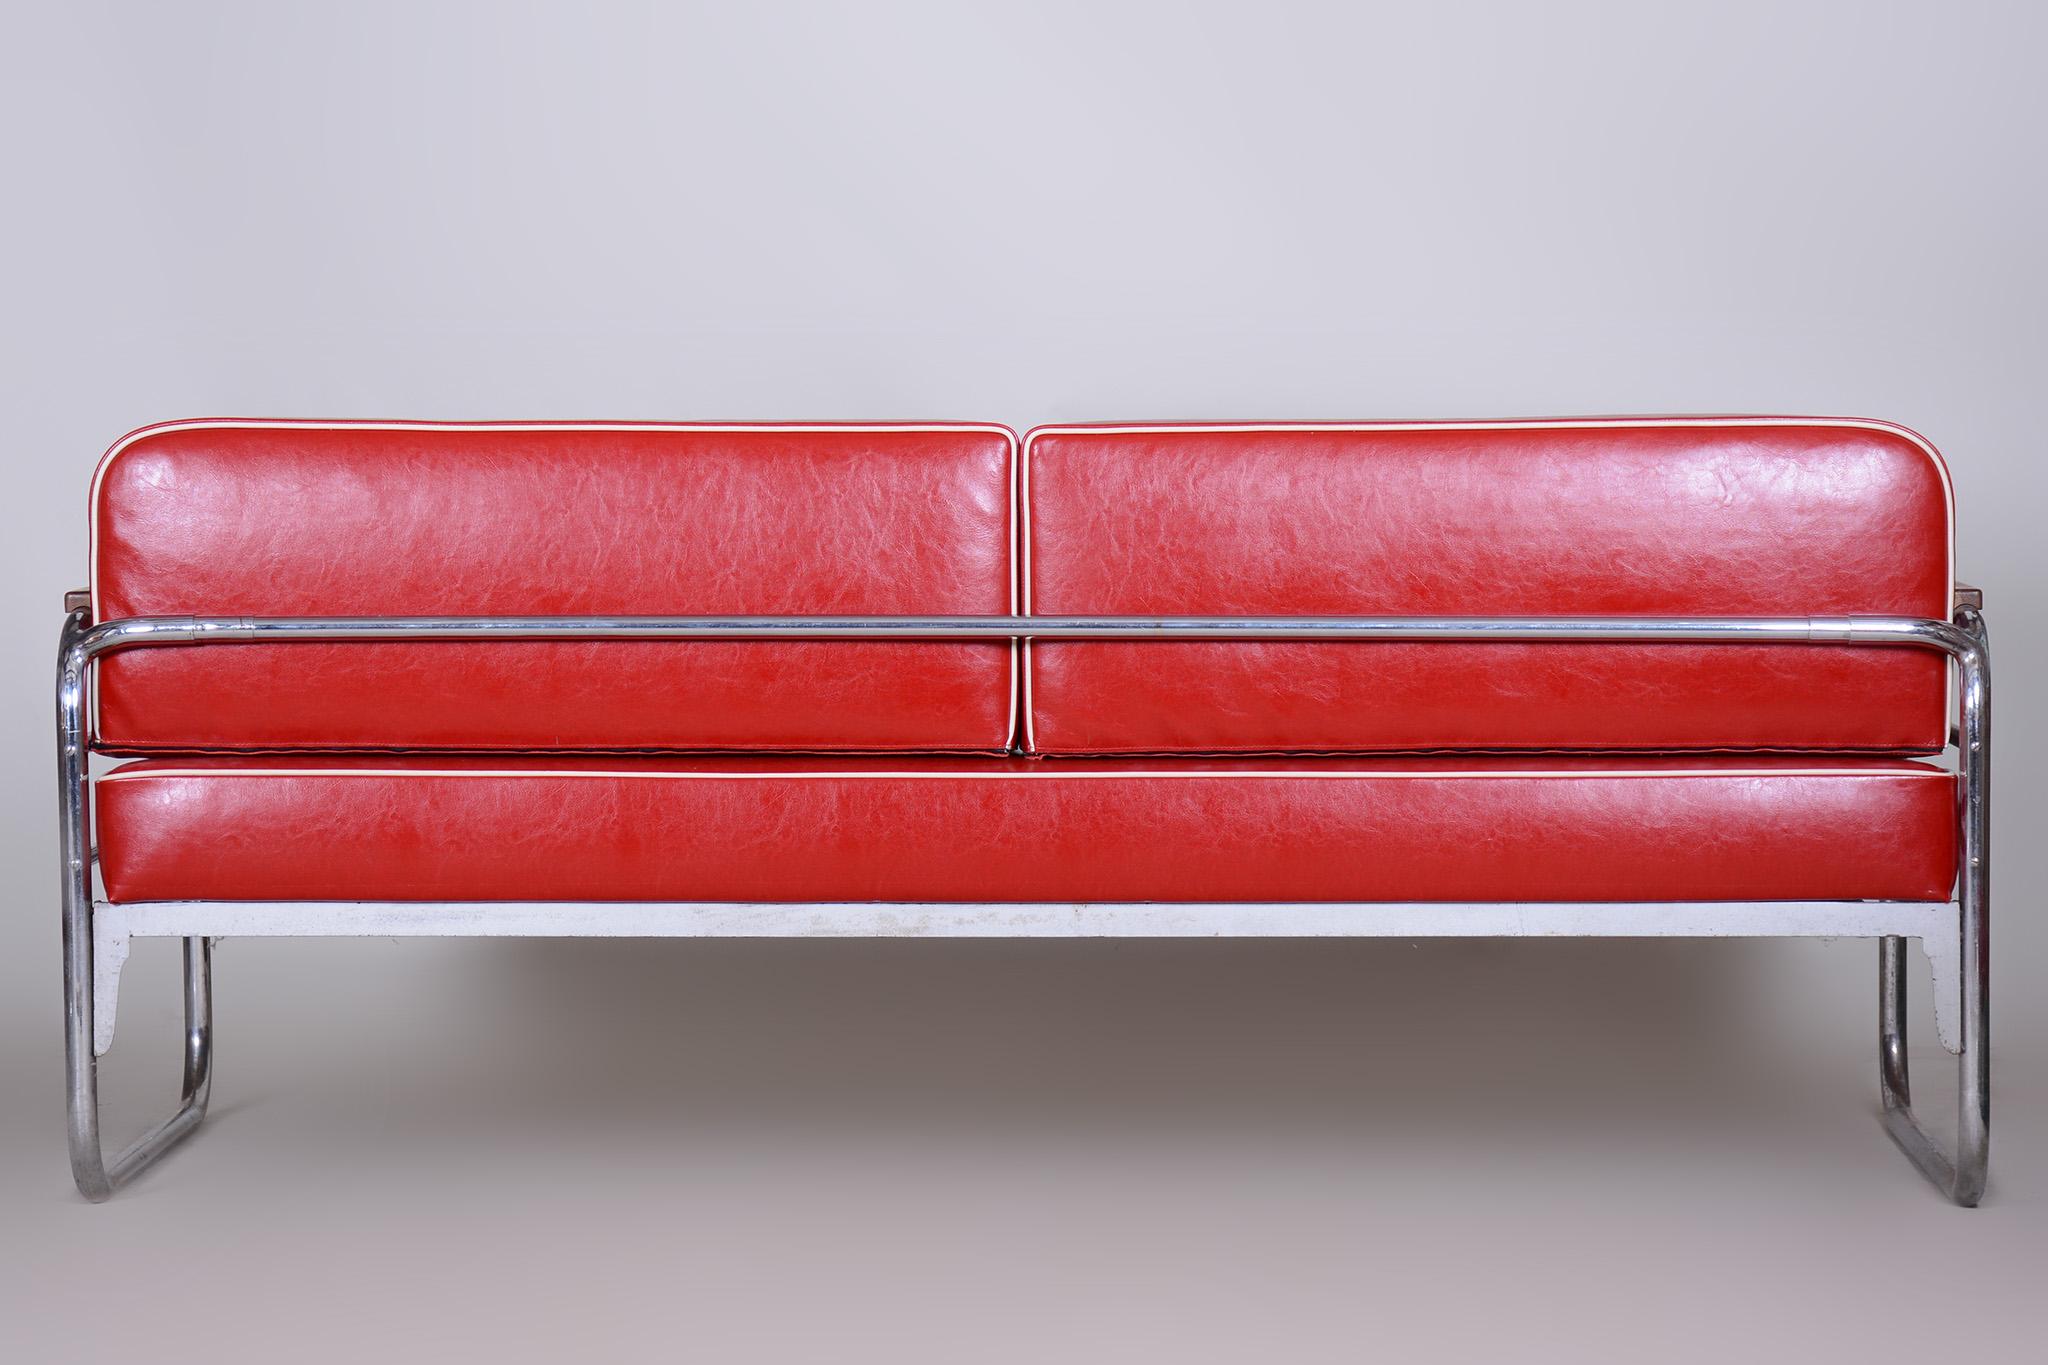 Red High-Quality Leather Bauhaus Sofa by Thonet, Chrome, Fully Restored, 1930s For Sale 4